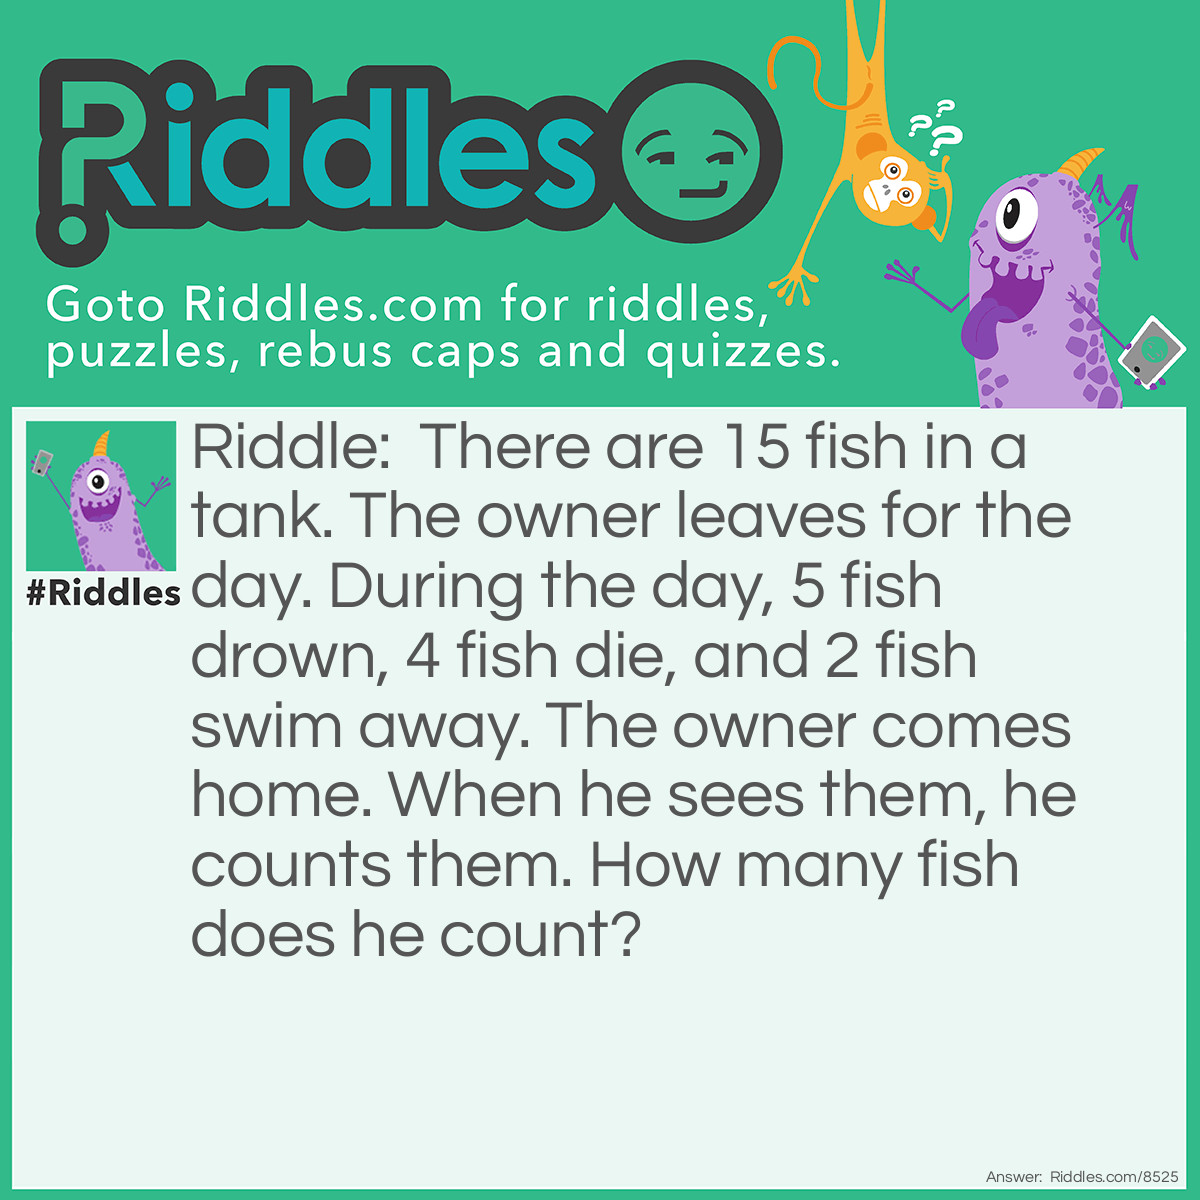 Riddle: There are 15 fish in a tank. The owner leaves for the day. During the day, 5 fish drown, 4 fish die, and 2 fish swim away. The owner comes home. When he sees them, he counts them. How many fish does he count? Answer: 15! Fish don't drown, They can't swim away because they're in a tank, and if they died, they're still IN the tank